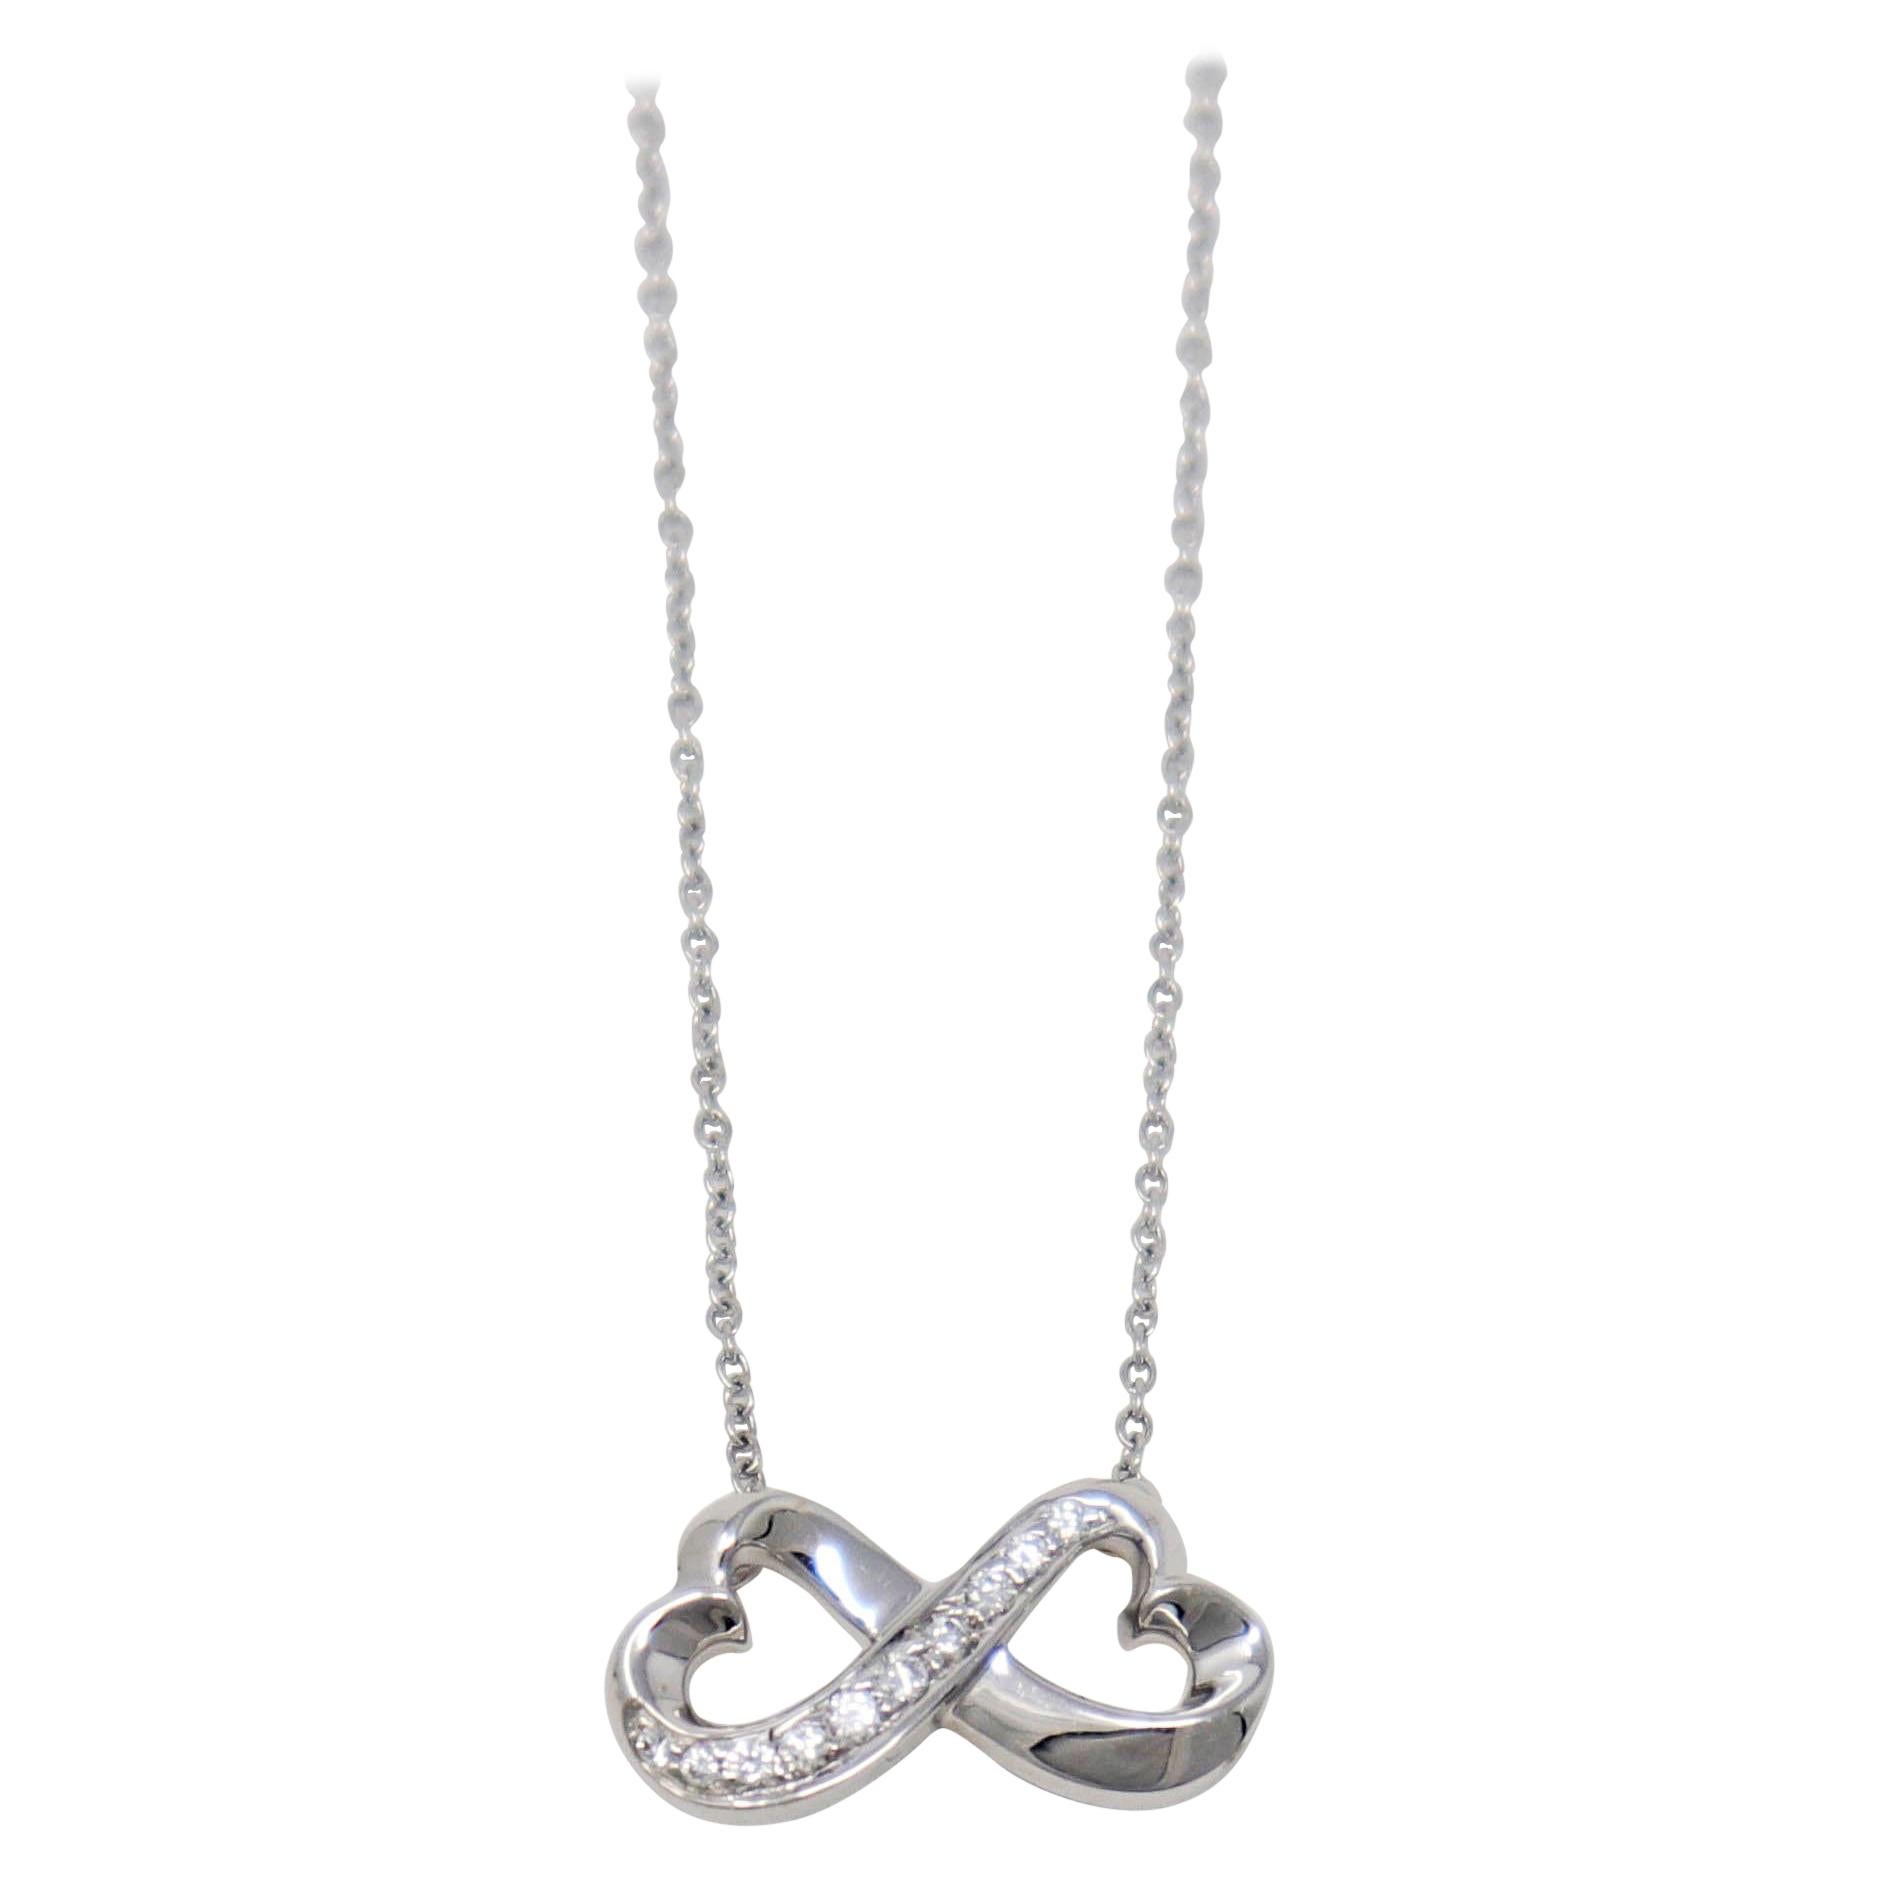 Paloma Picasso for Tiffany & Co. Loving Heart Infinity Pave Diamond Necklace